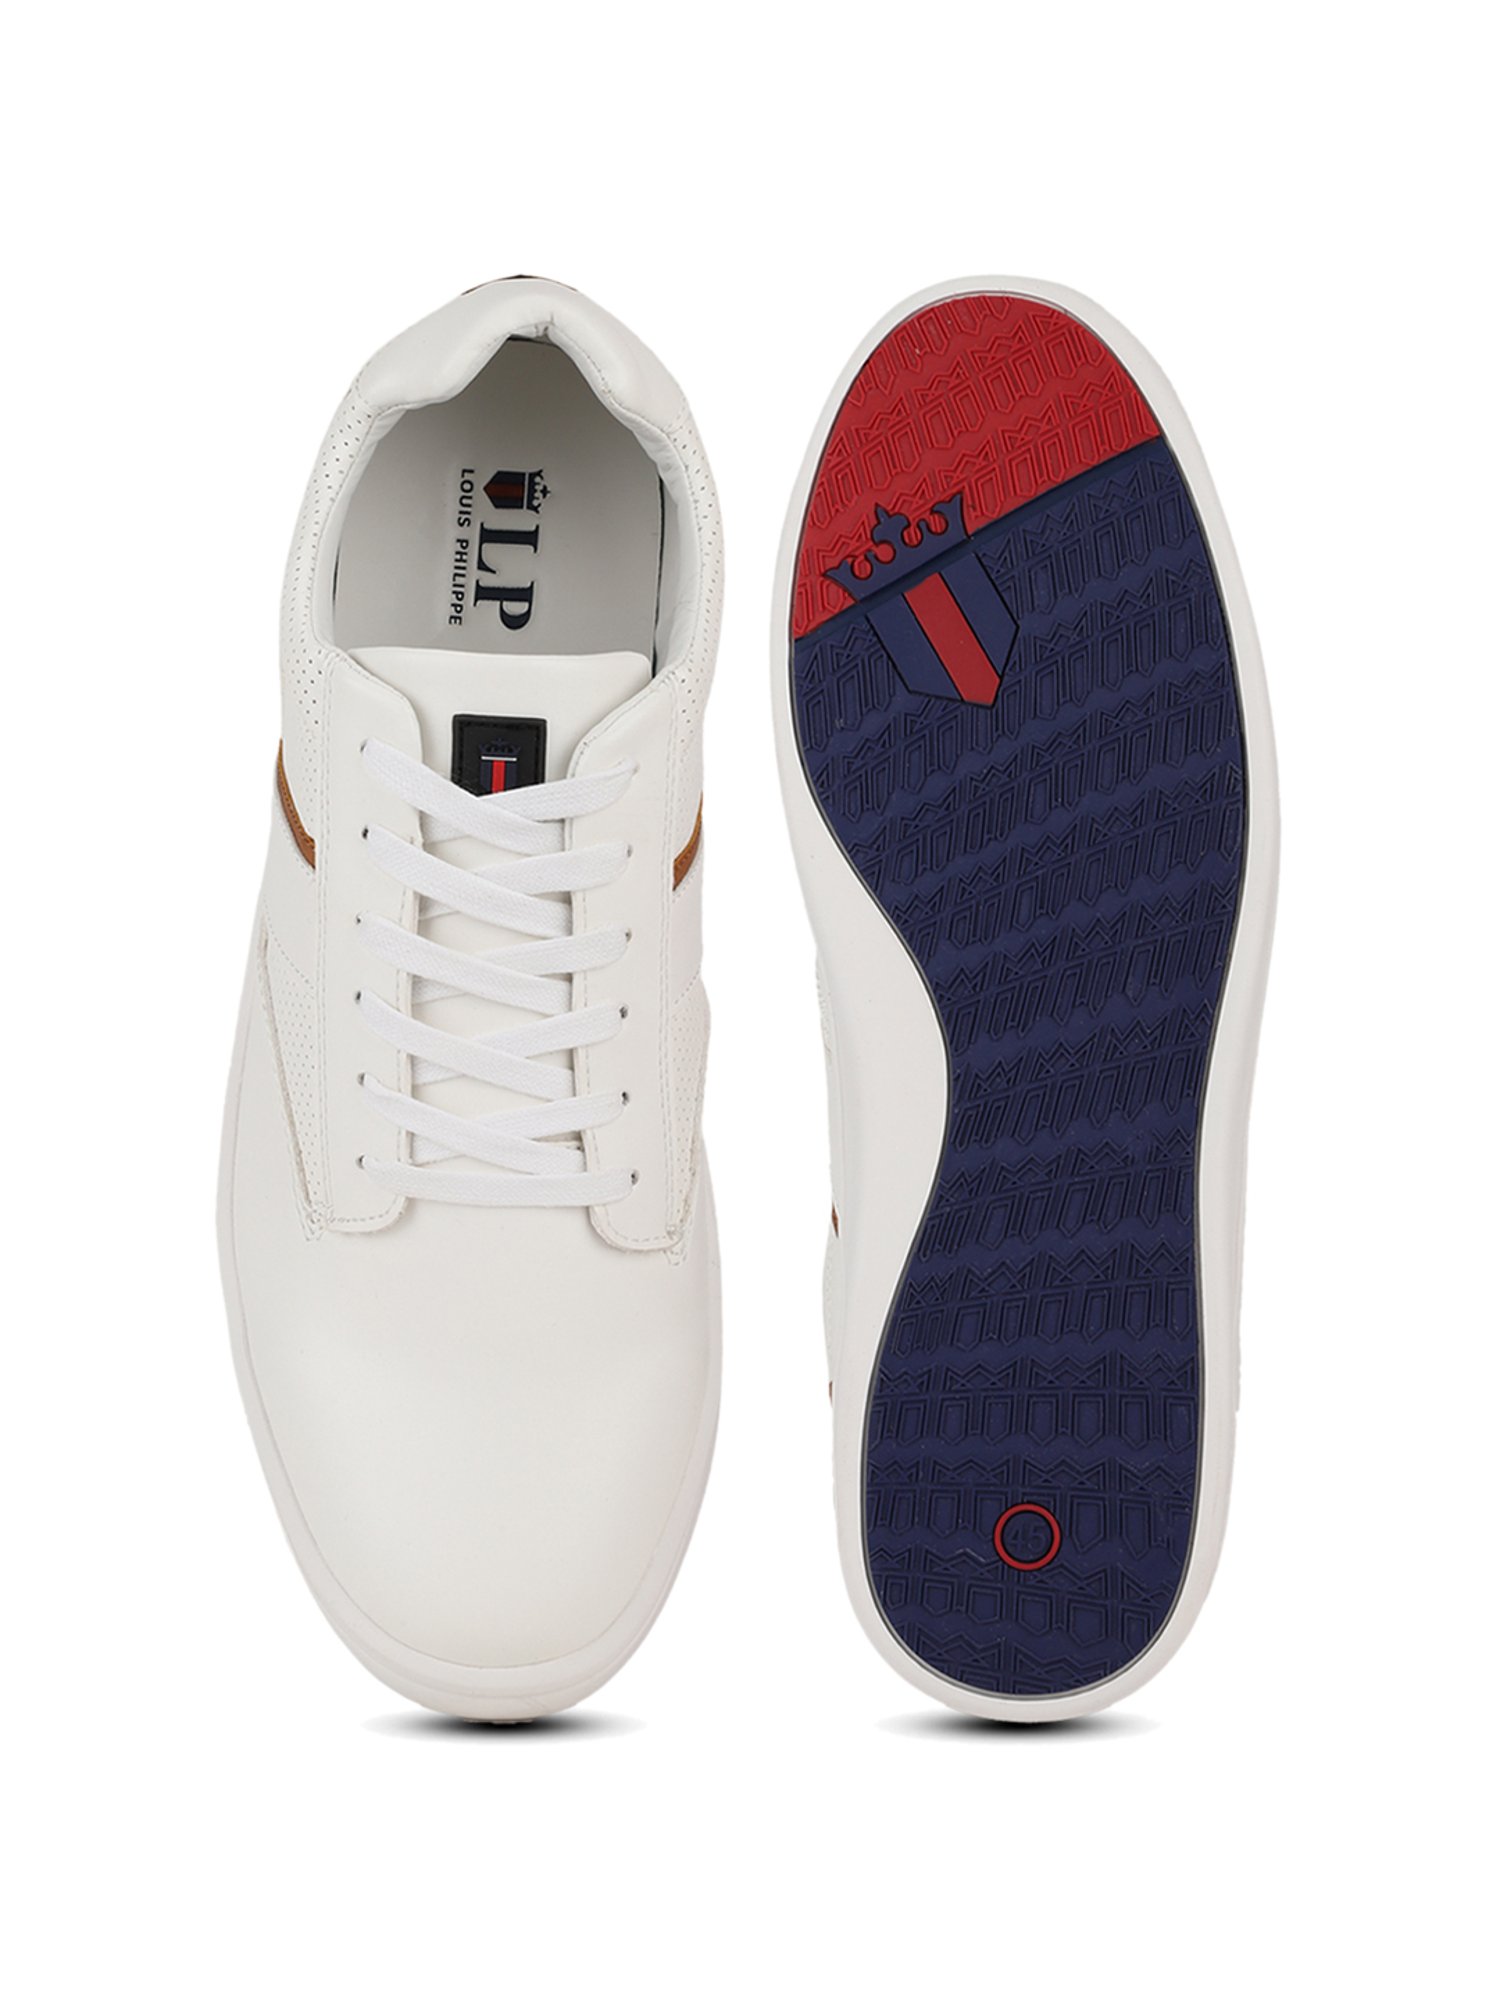 LOUIS PHILIPPE White Mens Sneakers in Visakhapatnam - Dealers,  Manufacturers & Suppliers - Justdial